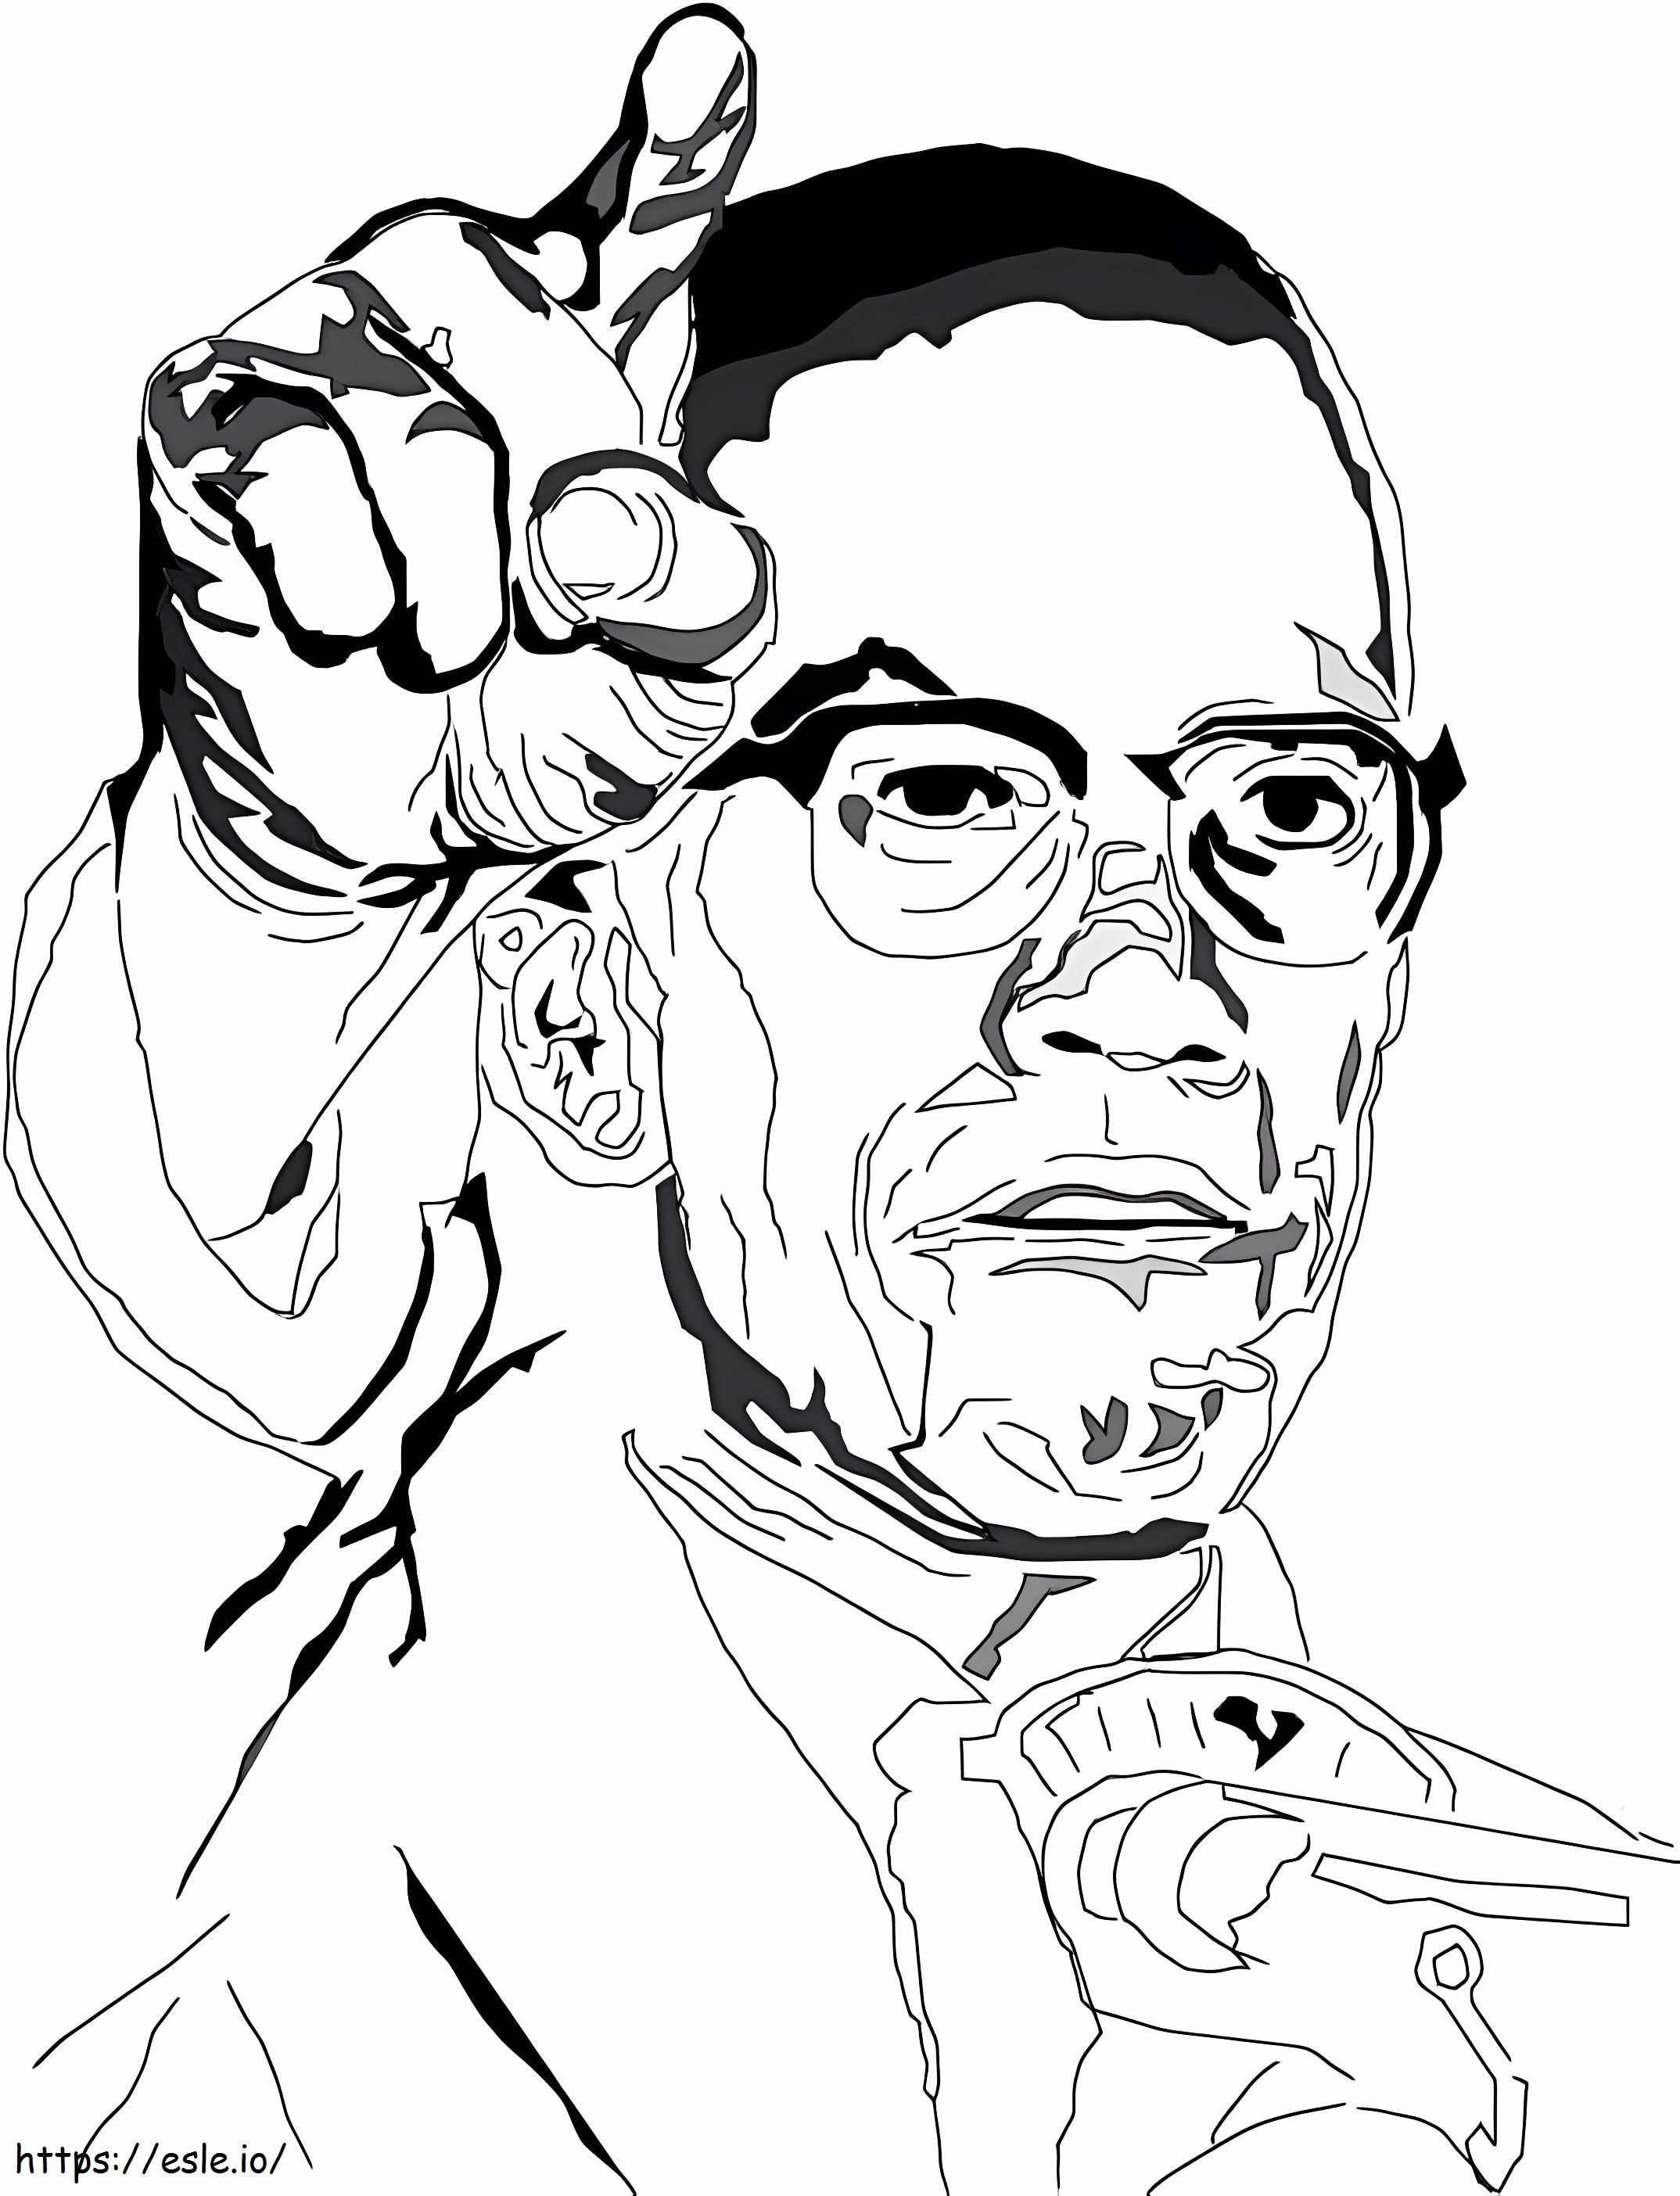 Malcolm X 2 coloring page